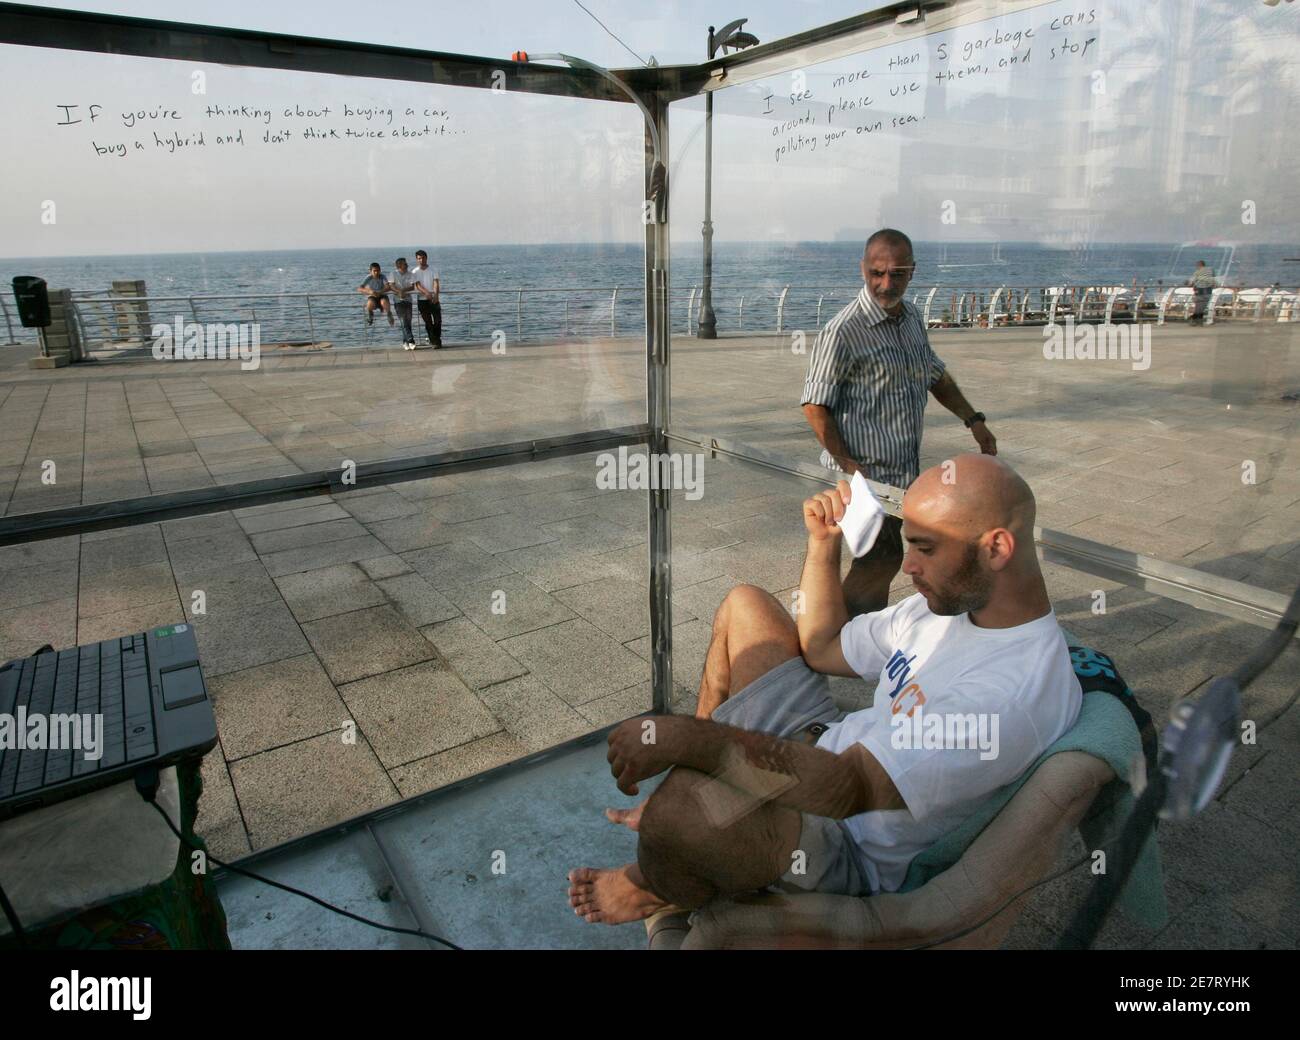 Lebanese environmental activist Rami Eid sits in a transparent cube as  people watch him at Ain al-Mrayseh corniche in Beirut, October 16, 2009.  "The man in the Cube" is a project organized